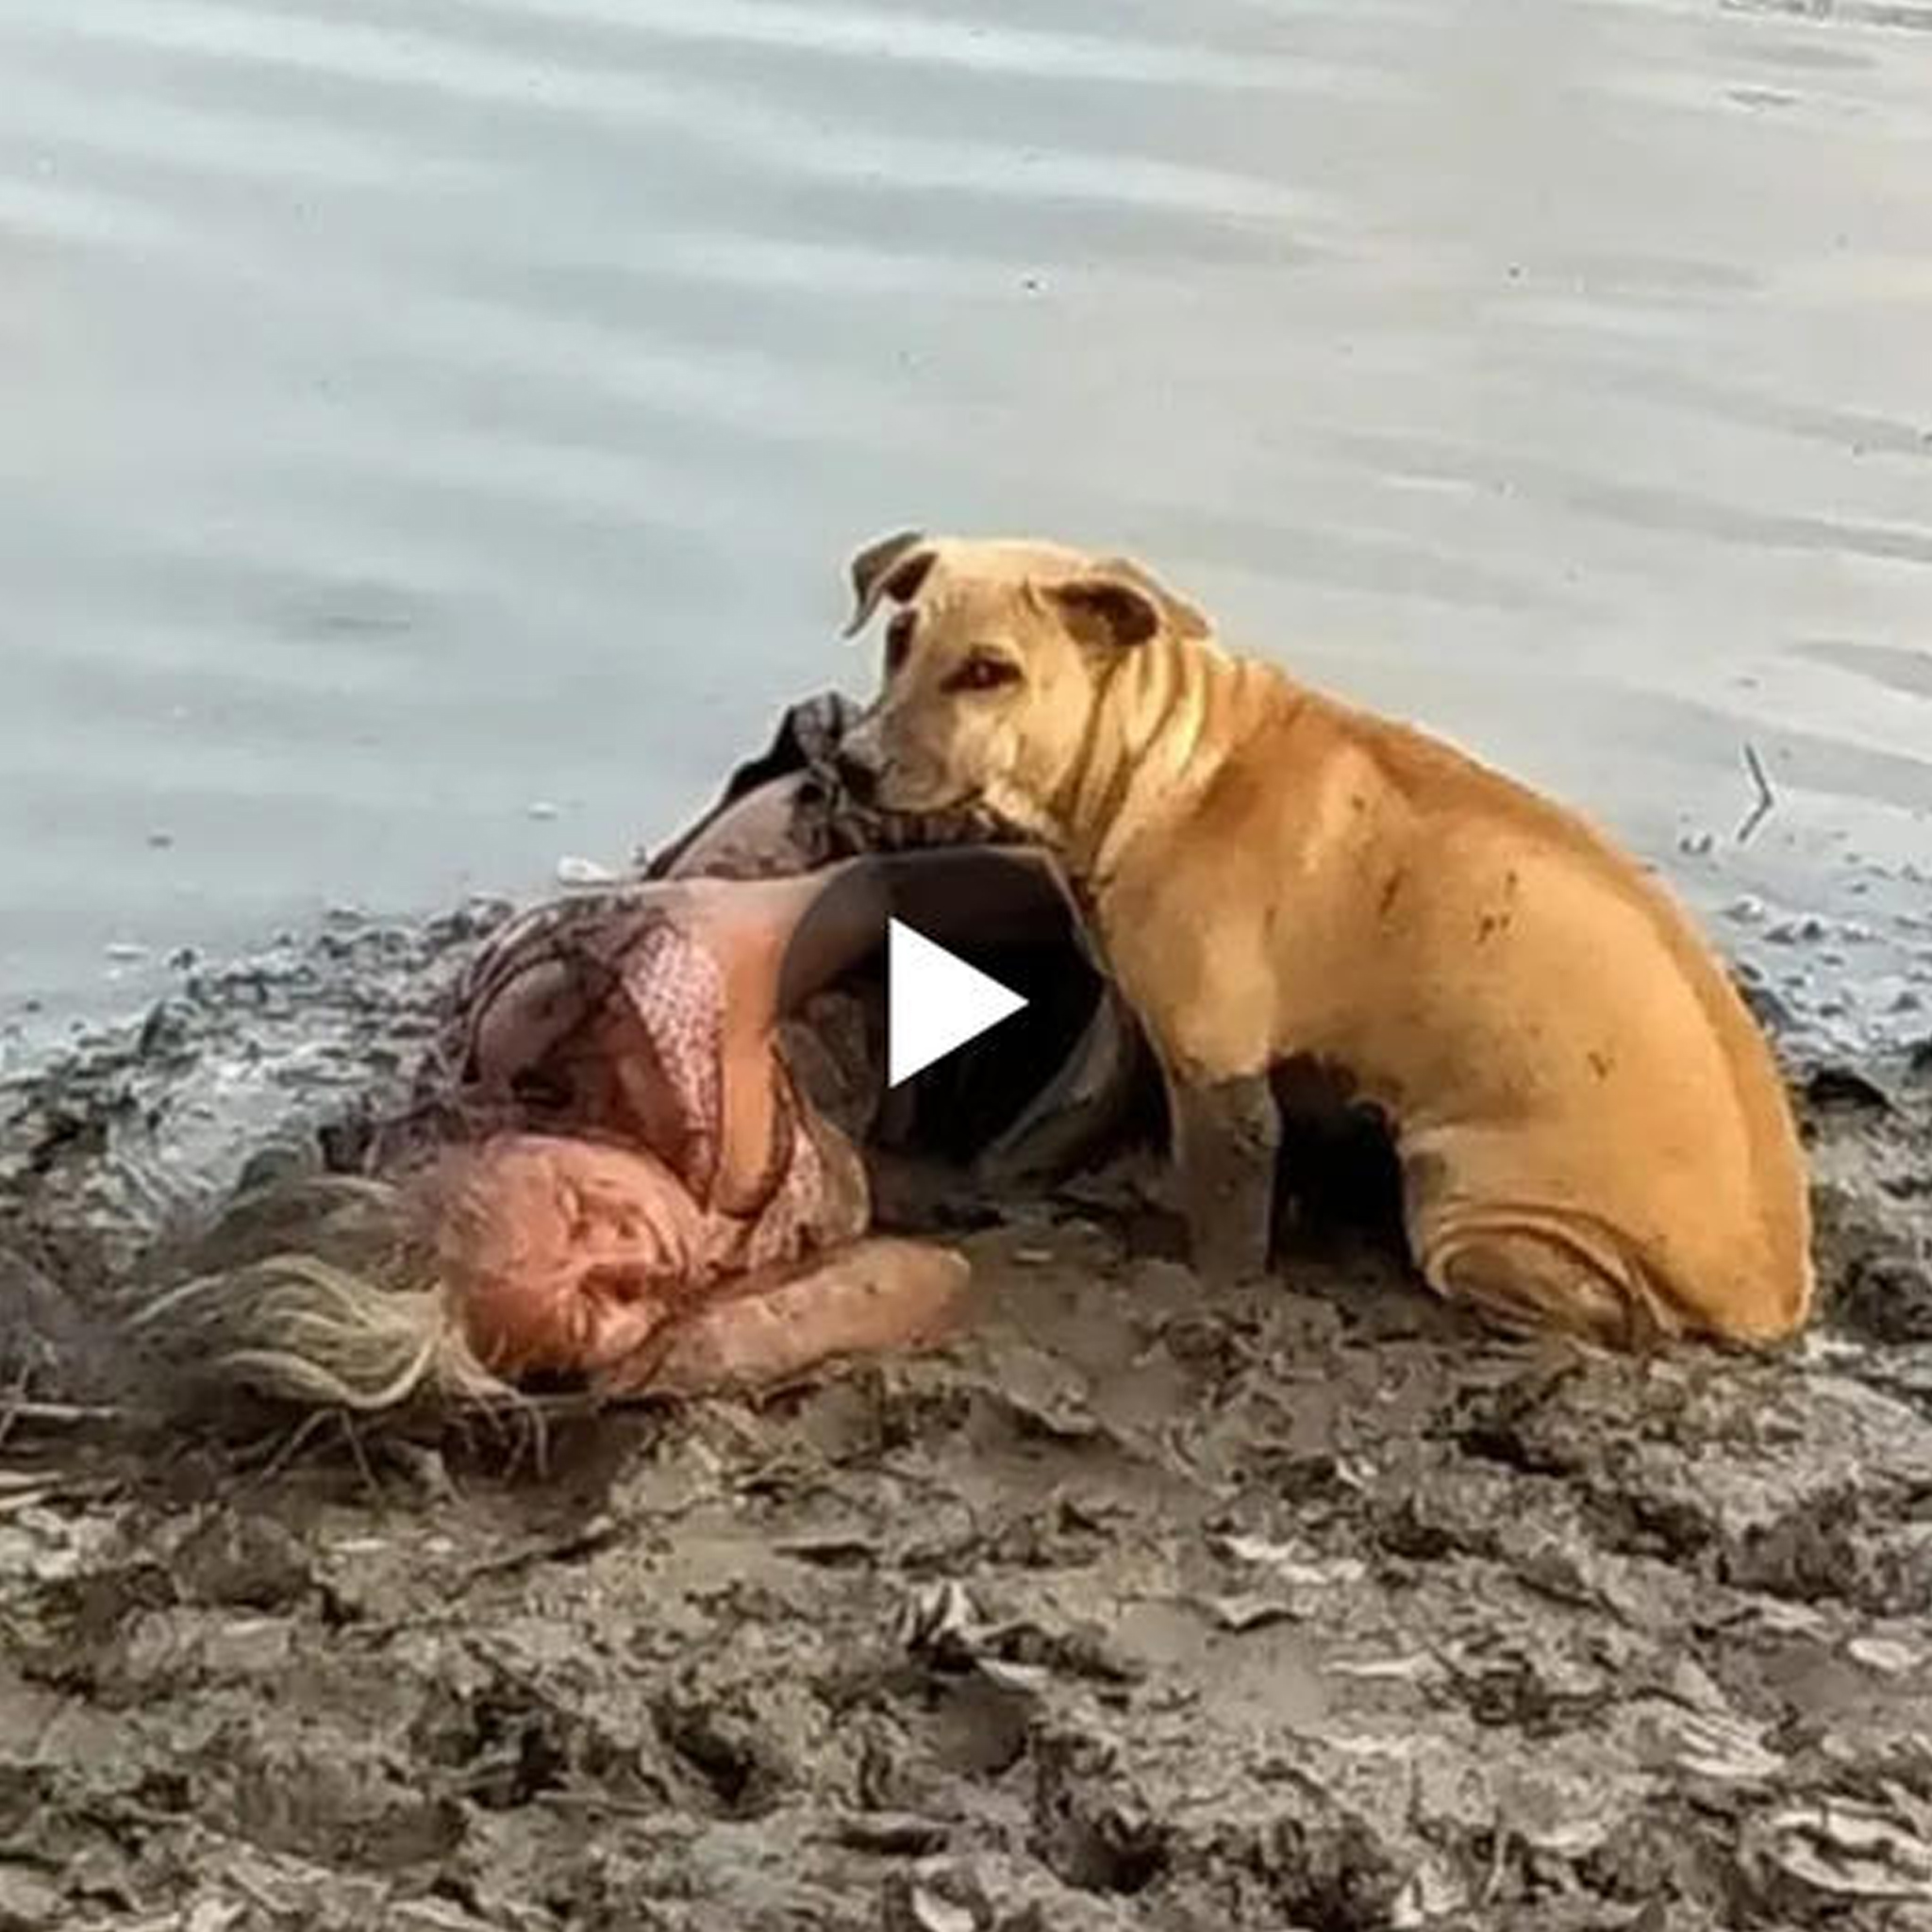 Loyal companion: Admired by millions for its unwavering love and loyalty, a devoted dog stood guard next to a 90-year-old woman who was exhausted and trapped after struggling in the mud. The dog made sure the woman was safe and asked for assistance from onlookers. ‎